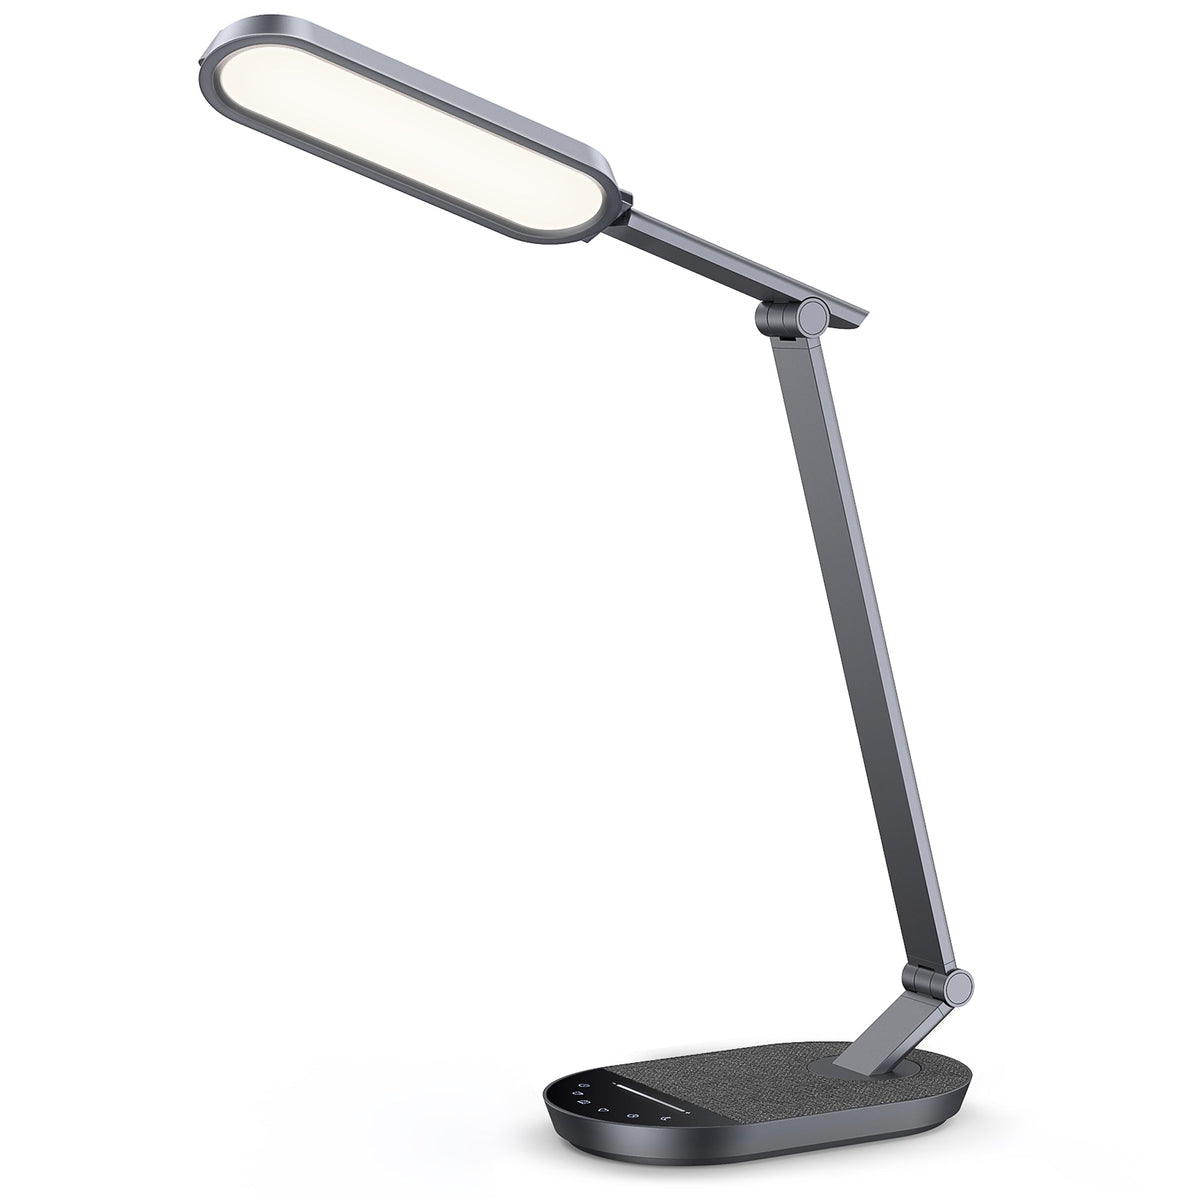 LED Hightech Desk Lamp 56, Large, Luxury Aluminum Alloy, with Super Fast Charging port